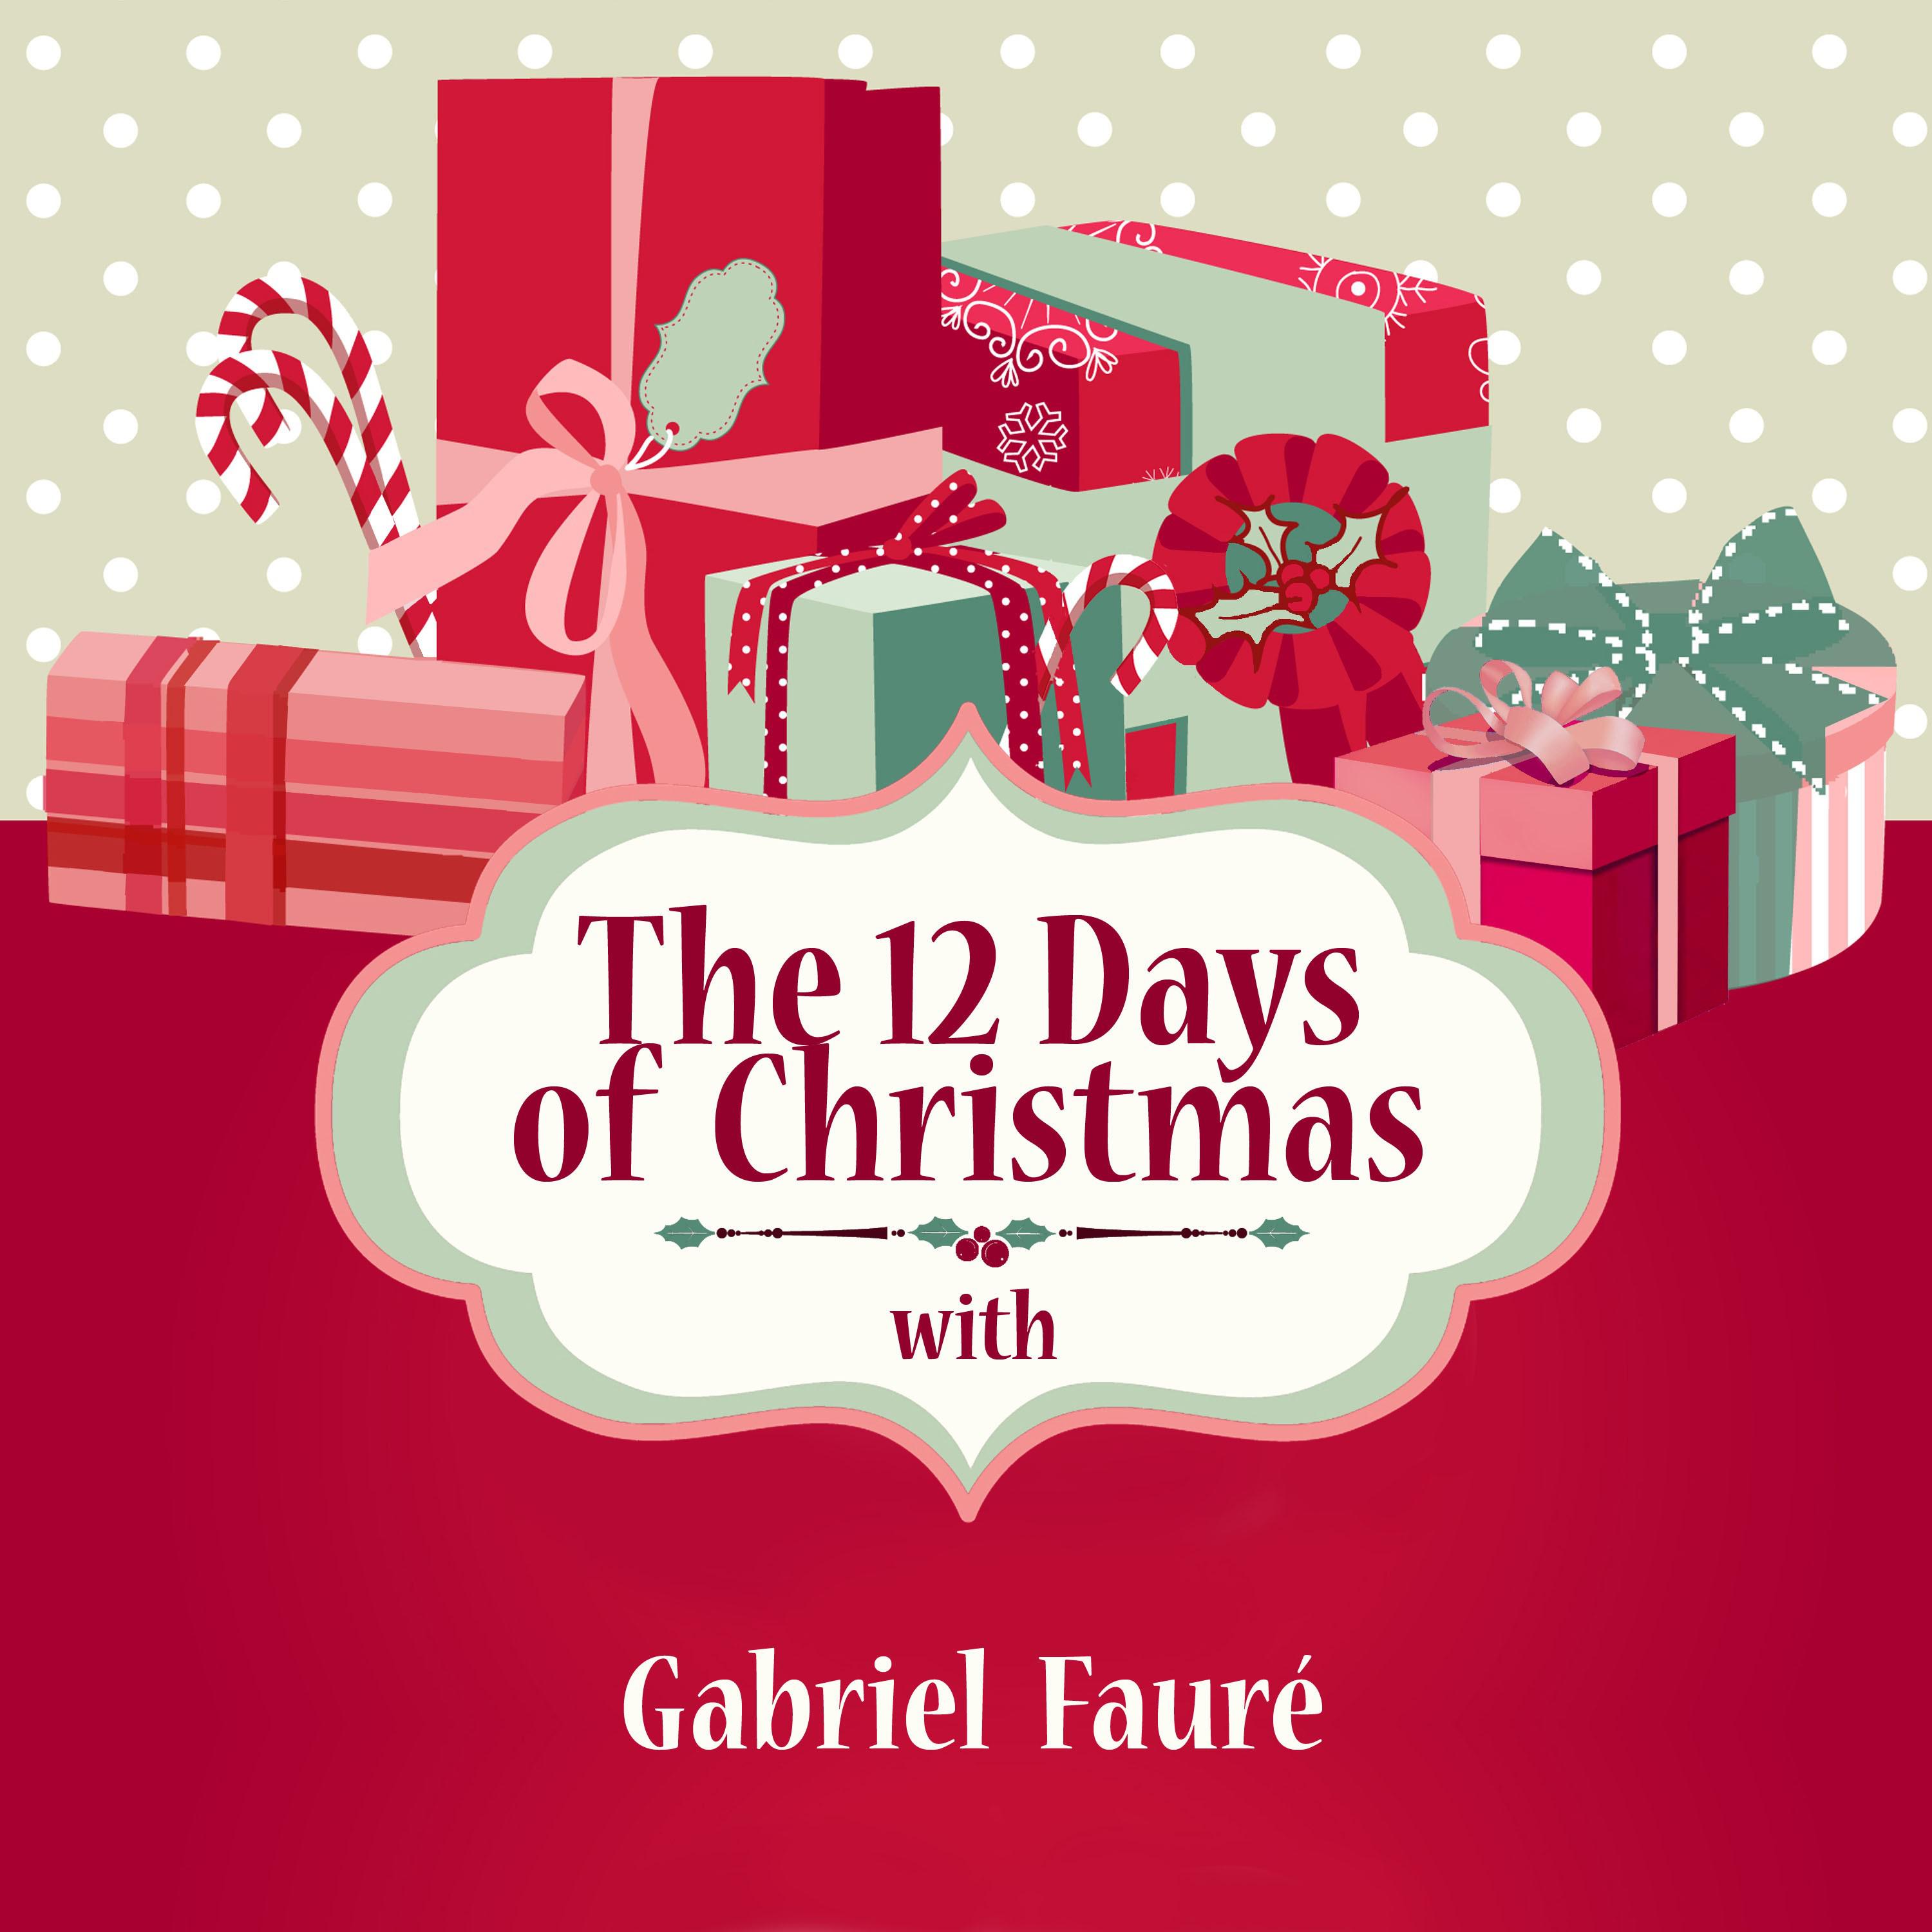 The 12 Days of Christmas with Gabriel Faure